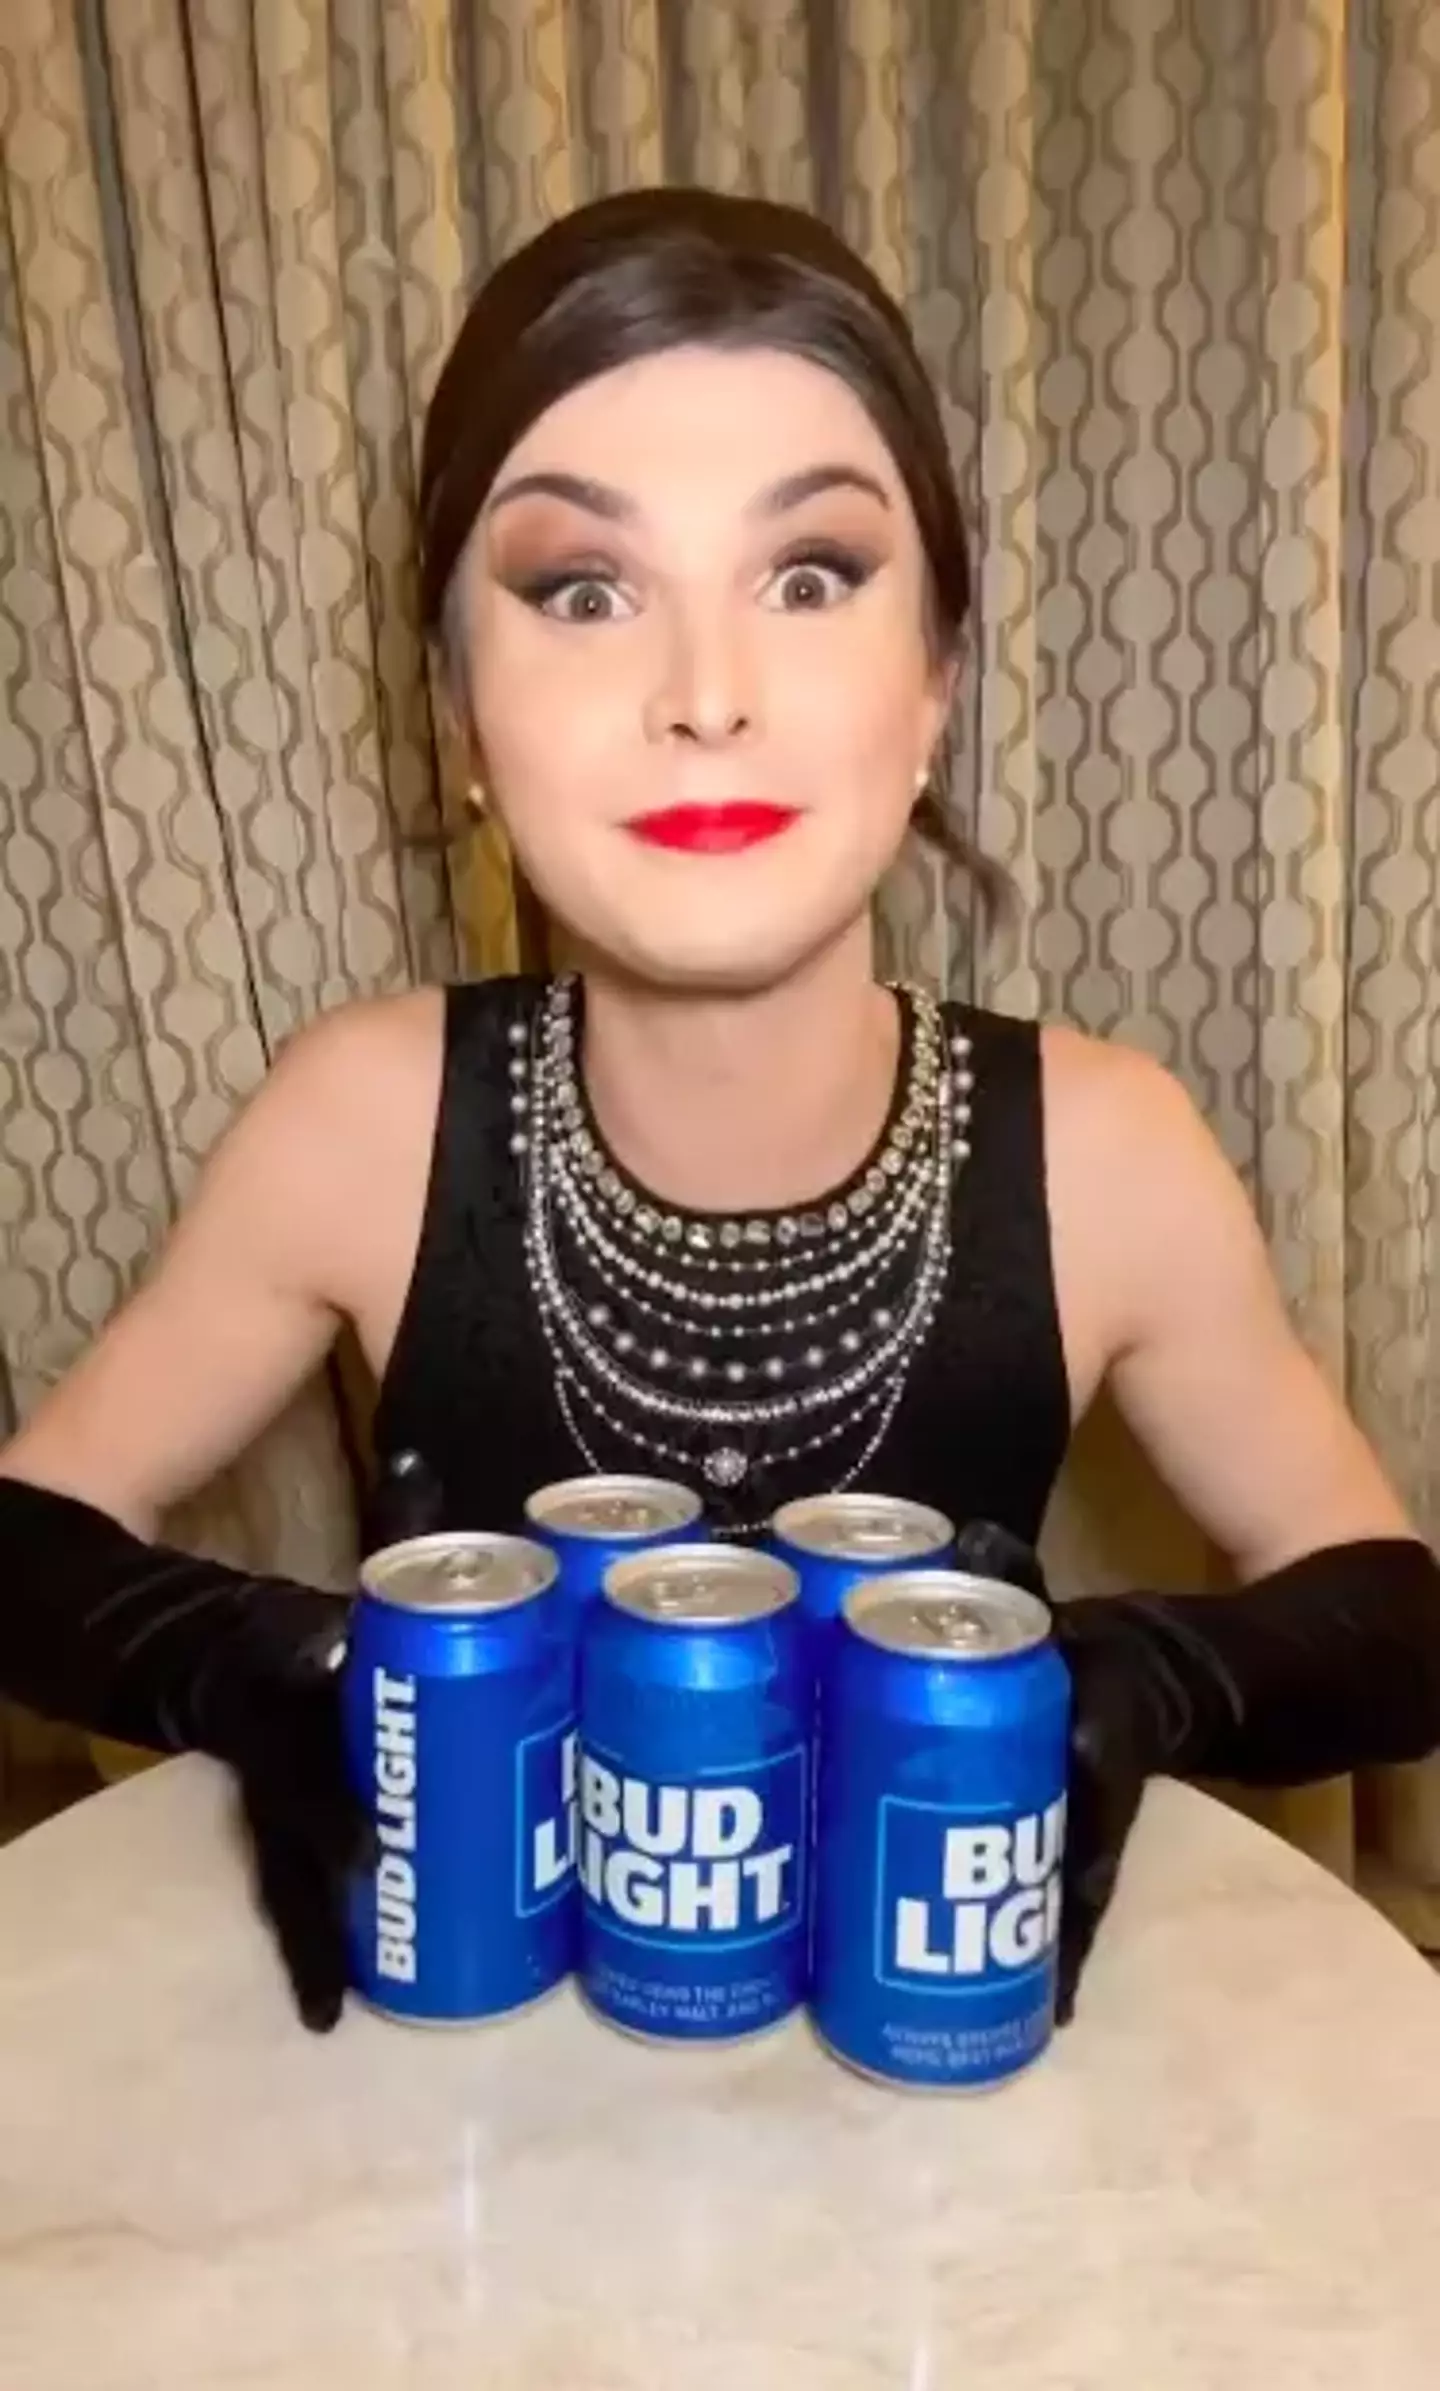 Bud Light sent her some cans of beer to celebrate the one-year anniversary of her transition.